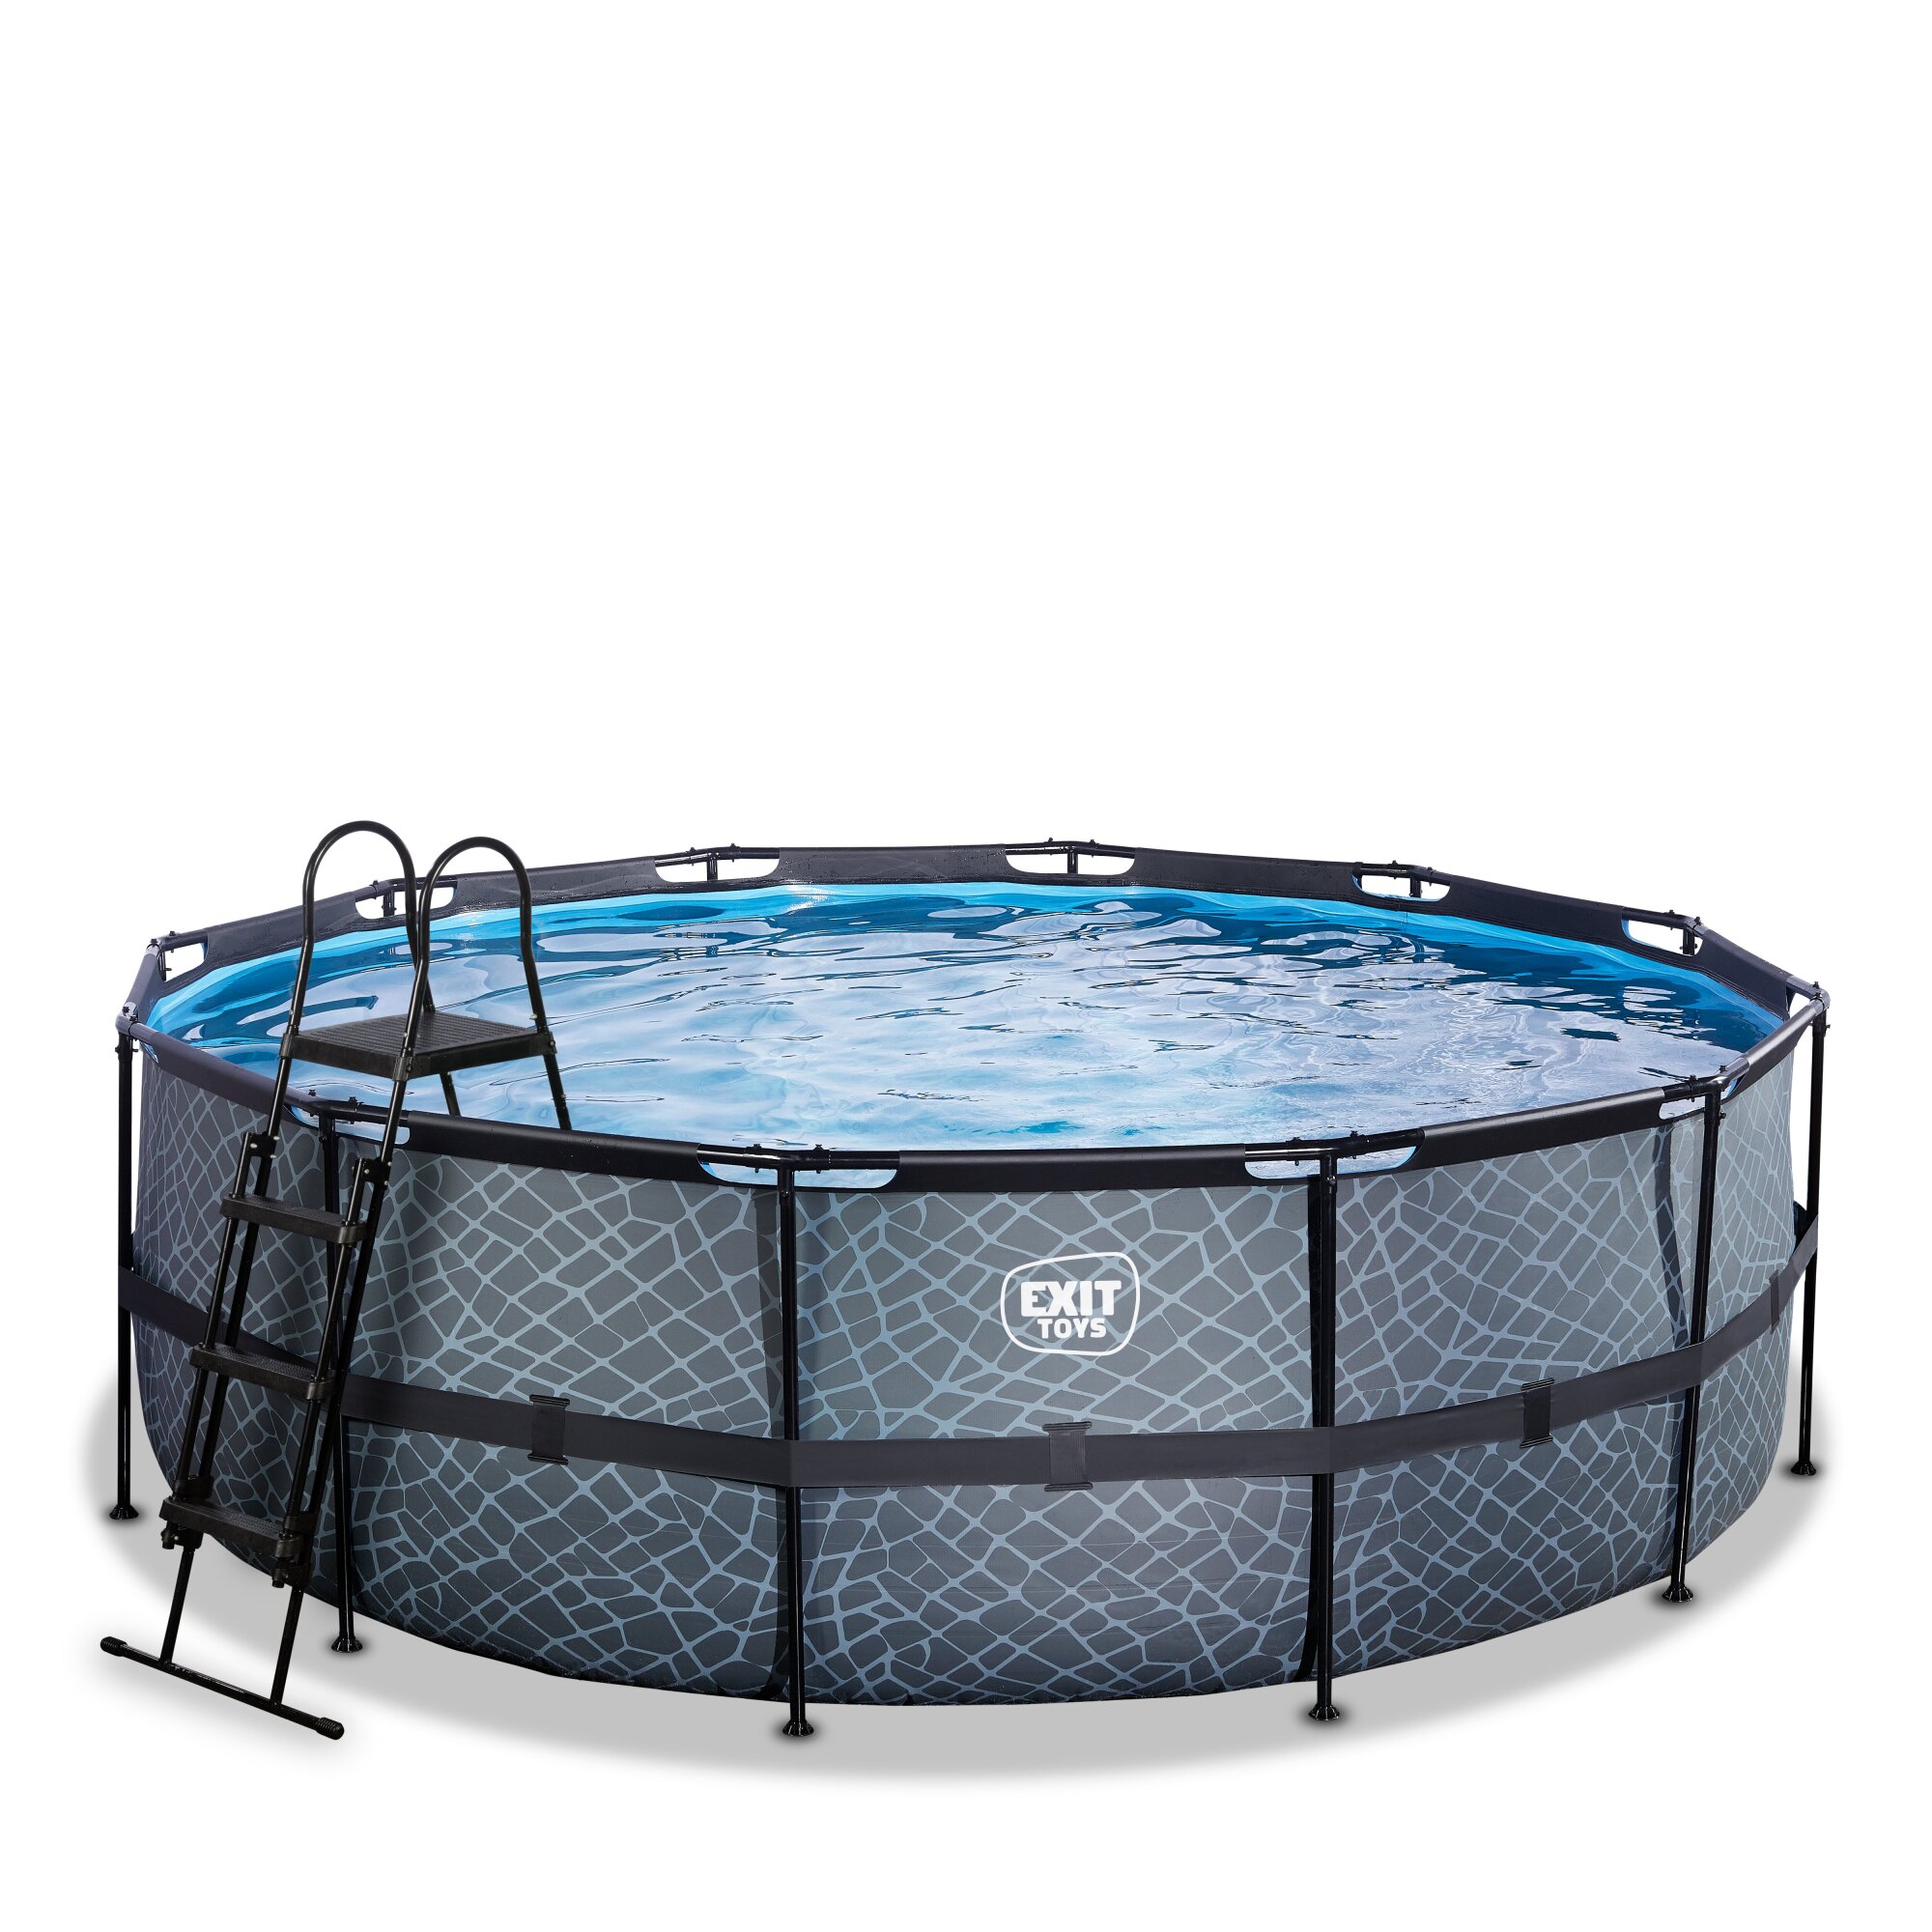 Nerve vinter usikre EXIT Stone pool ø427x122cm with filter pump - Toy House